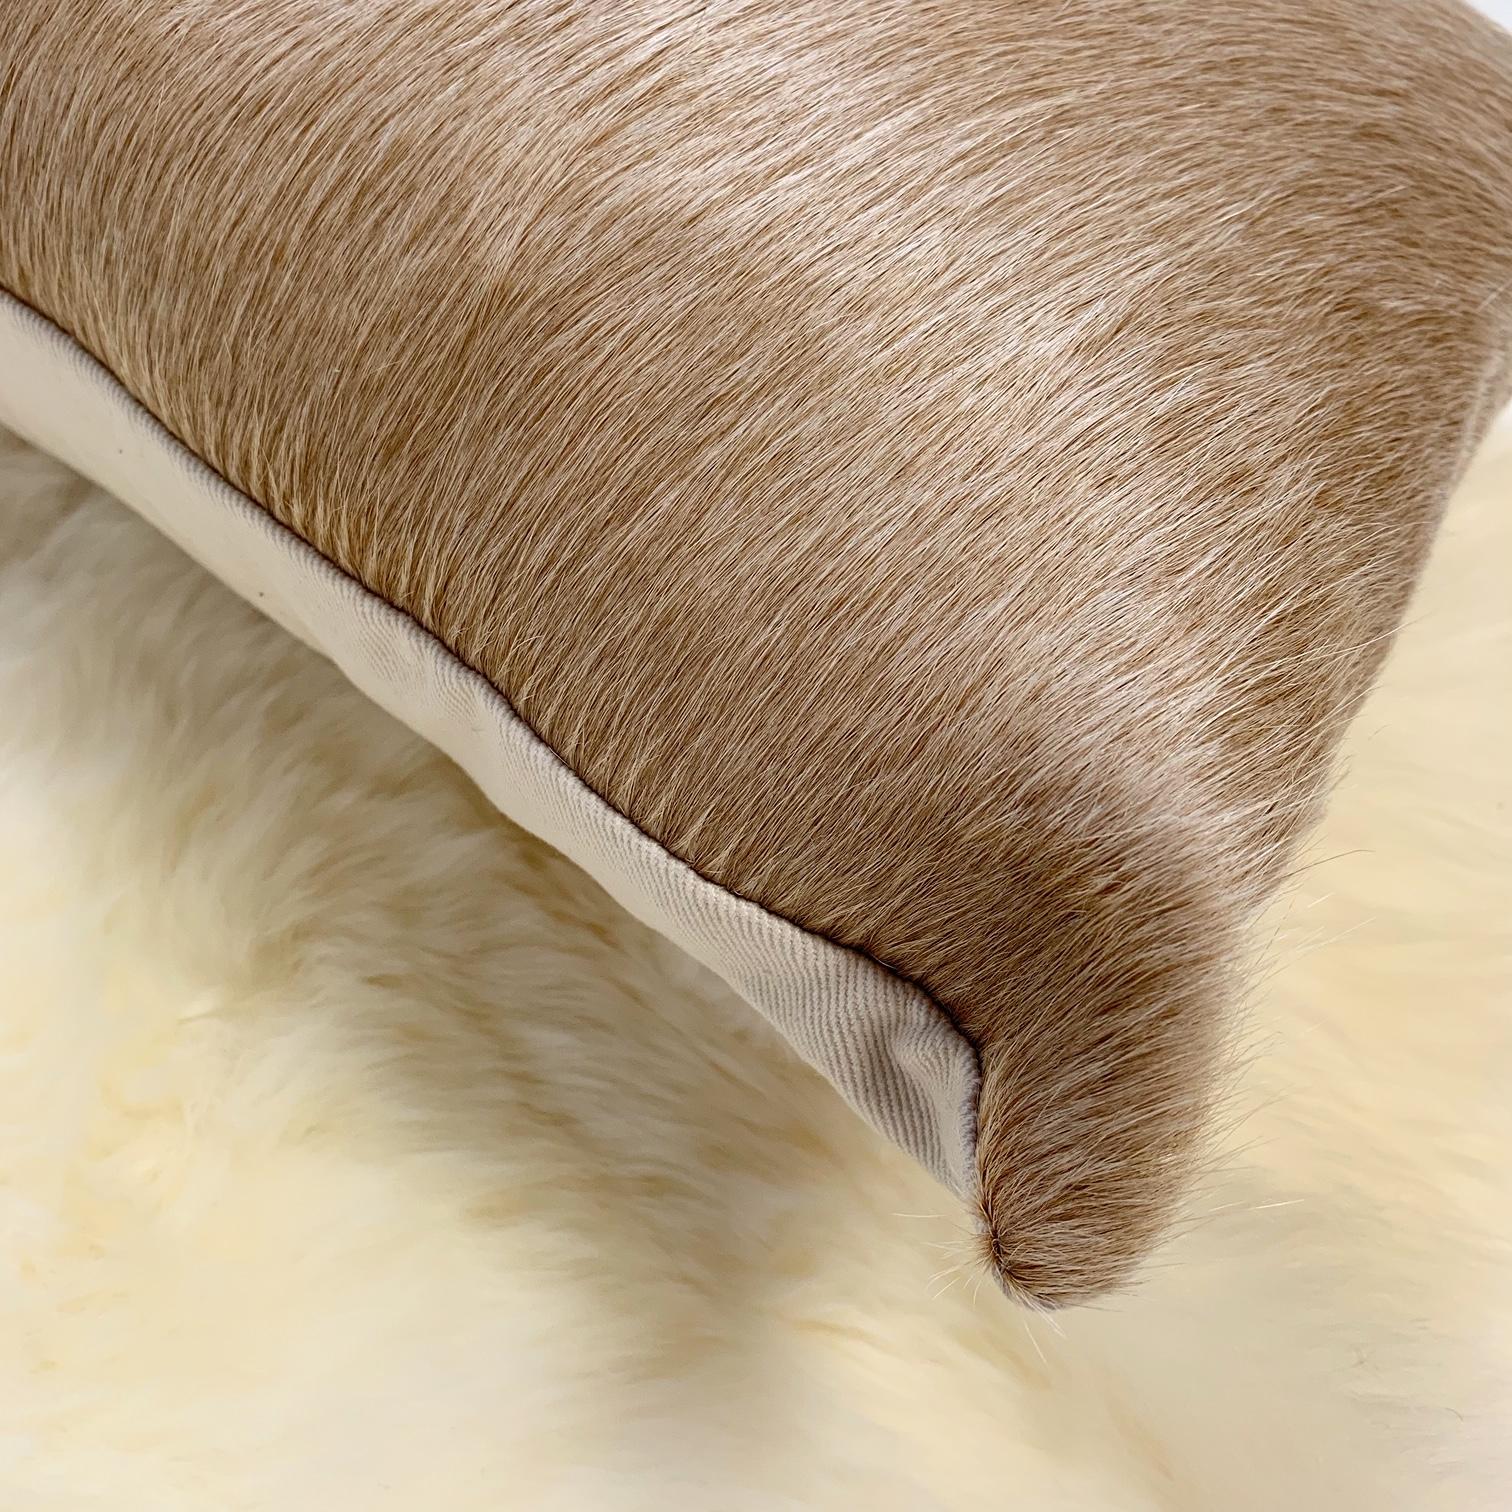 Forsyth cowhide pillows are simply the best. The most beautiful cowhides are selected, handcut, handstitched, and hand stuffed with the finest goose down. Each step is meticulously curated by Saint Louis based Forsyth artisans. 

Details:
13 x 21